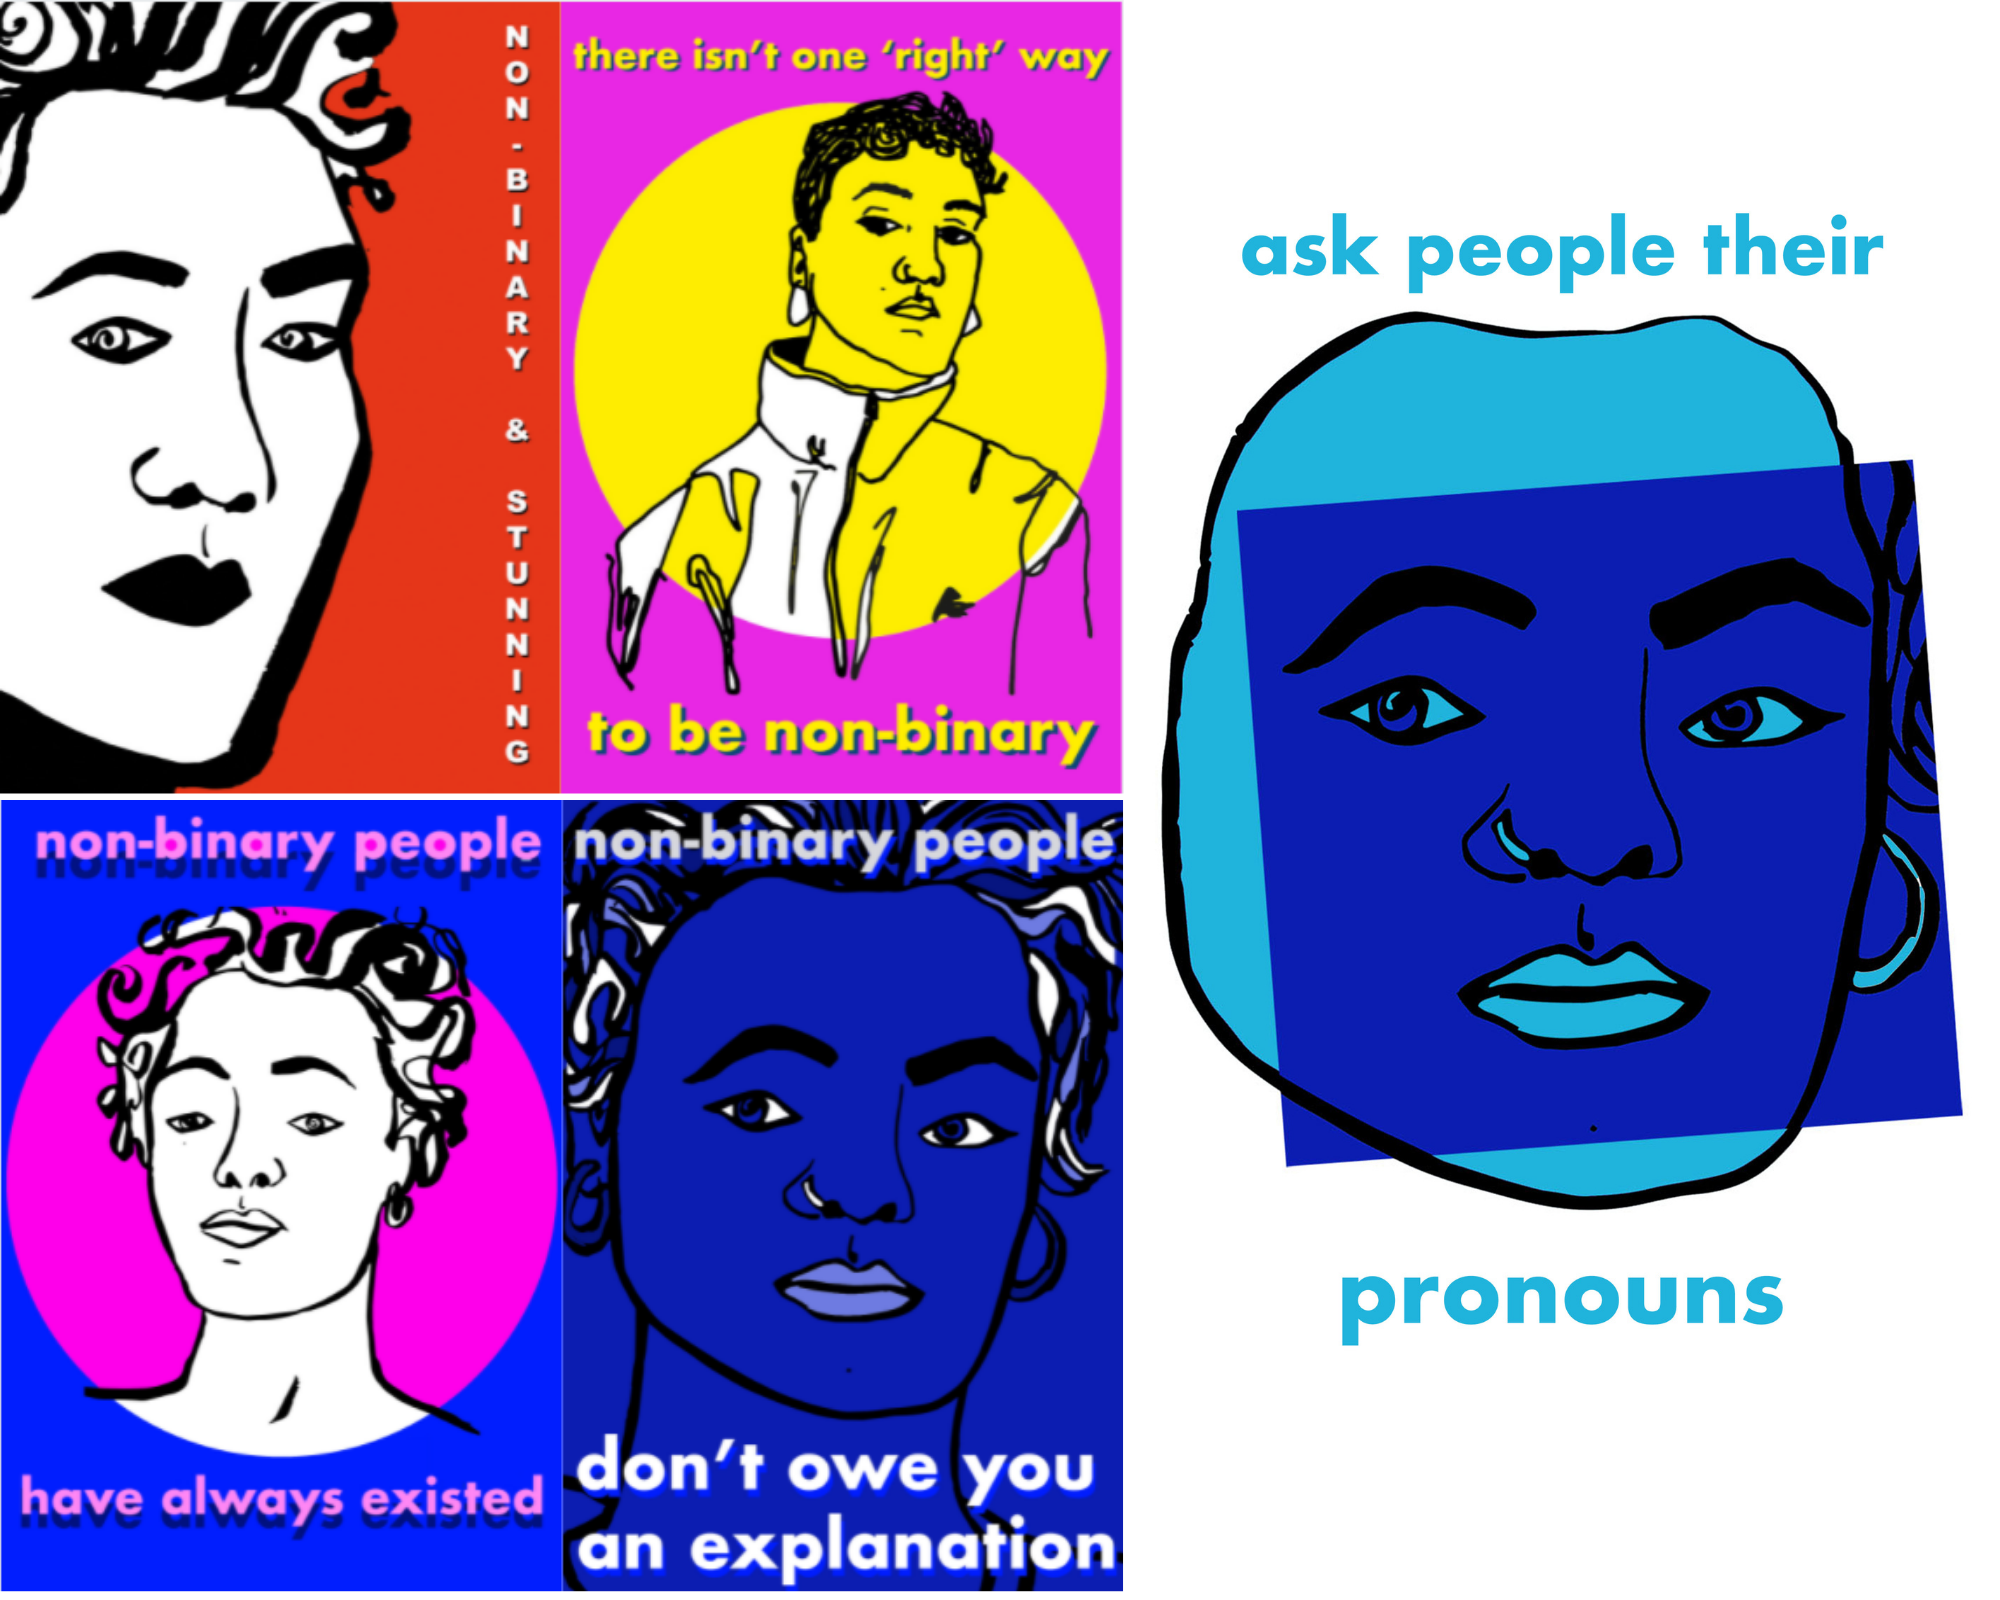 5 poster style graphic pieces of art. The first has a red background and a side profile of a person and text down the side reads 'Non-binary and Stunning'. The second has a pink background, overlayed with a yellow circle with an outline drawing of a person with undefinable gender expression, text reads 'there isnt one right way to be nonbinary'. the third peice shows a blue bakcground with a pink circle overlay and a person drawn over the top, text reads 'nonbinary people have always existed',  the fourth poster is all blue with a face drawn over the top, text reads 'non-binary people don't owe you an explanation'. The final poster shows a face outline with no hair in blue tones, text reads 'ask people their pronouns'